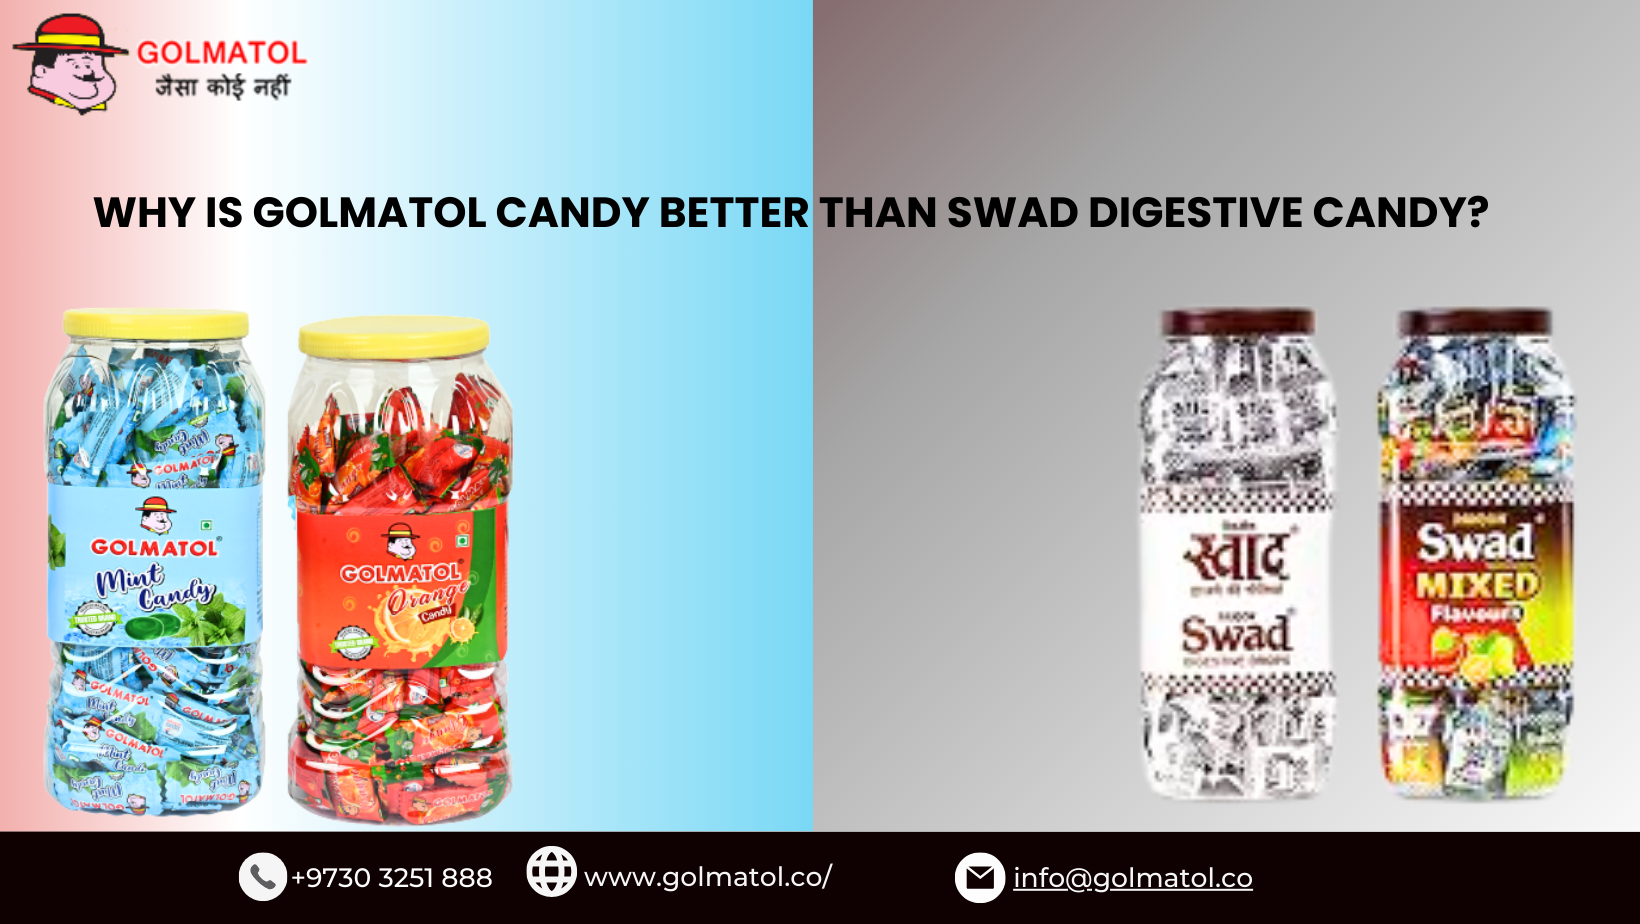 Why is Golmatol candy better than swad digestive candy?